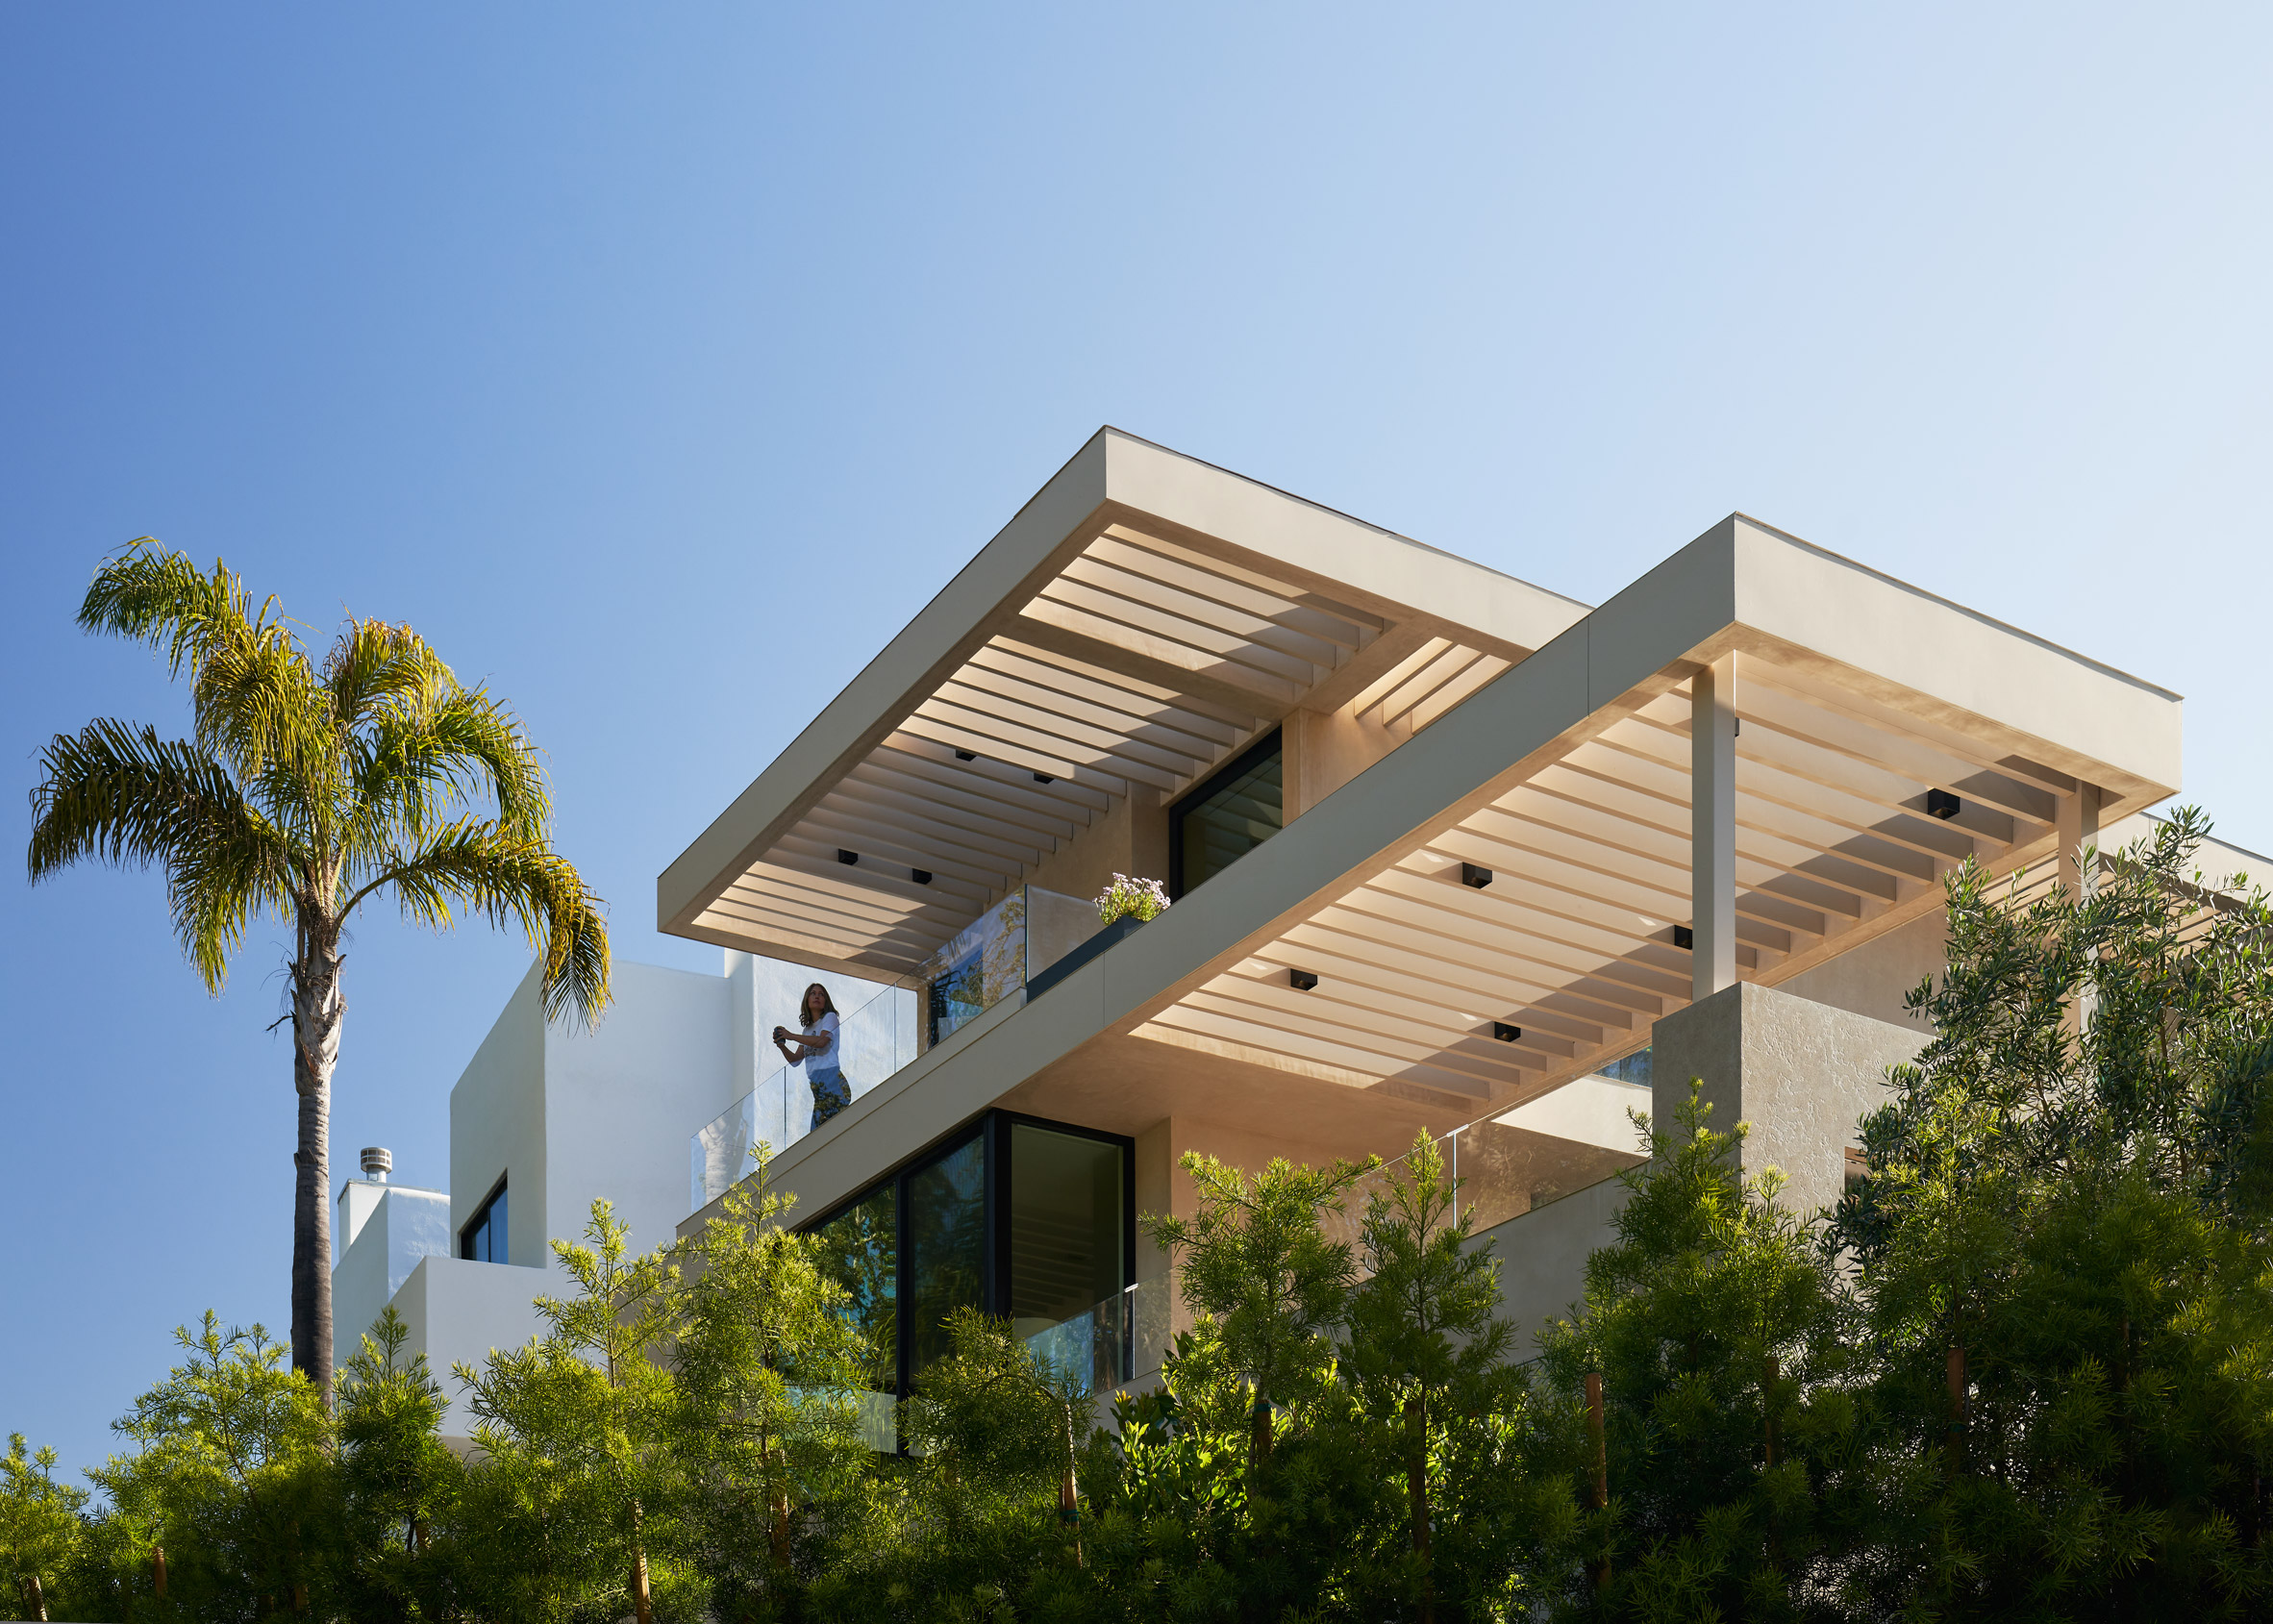 Rectilinear louvres on Canyon Terrace House by Montalba Architects in California